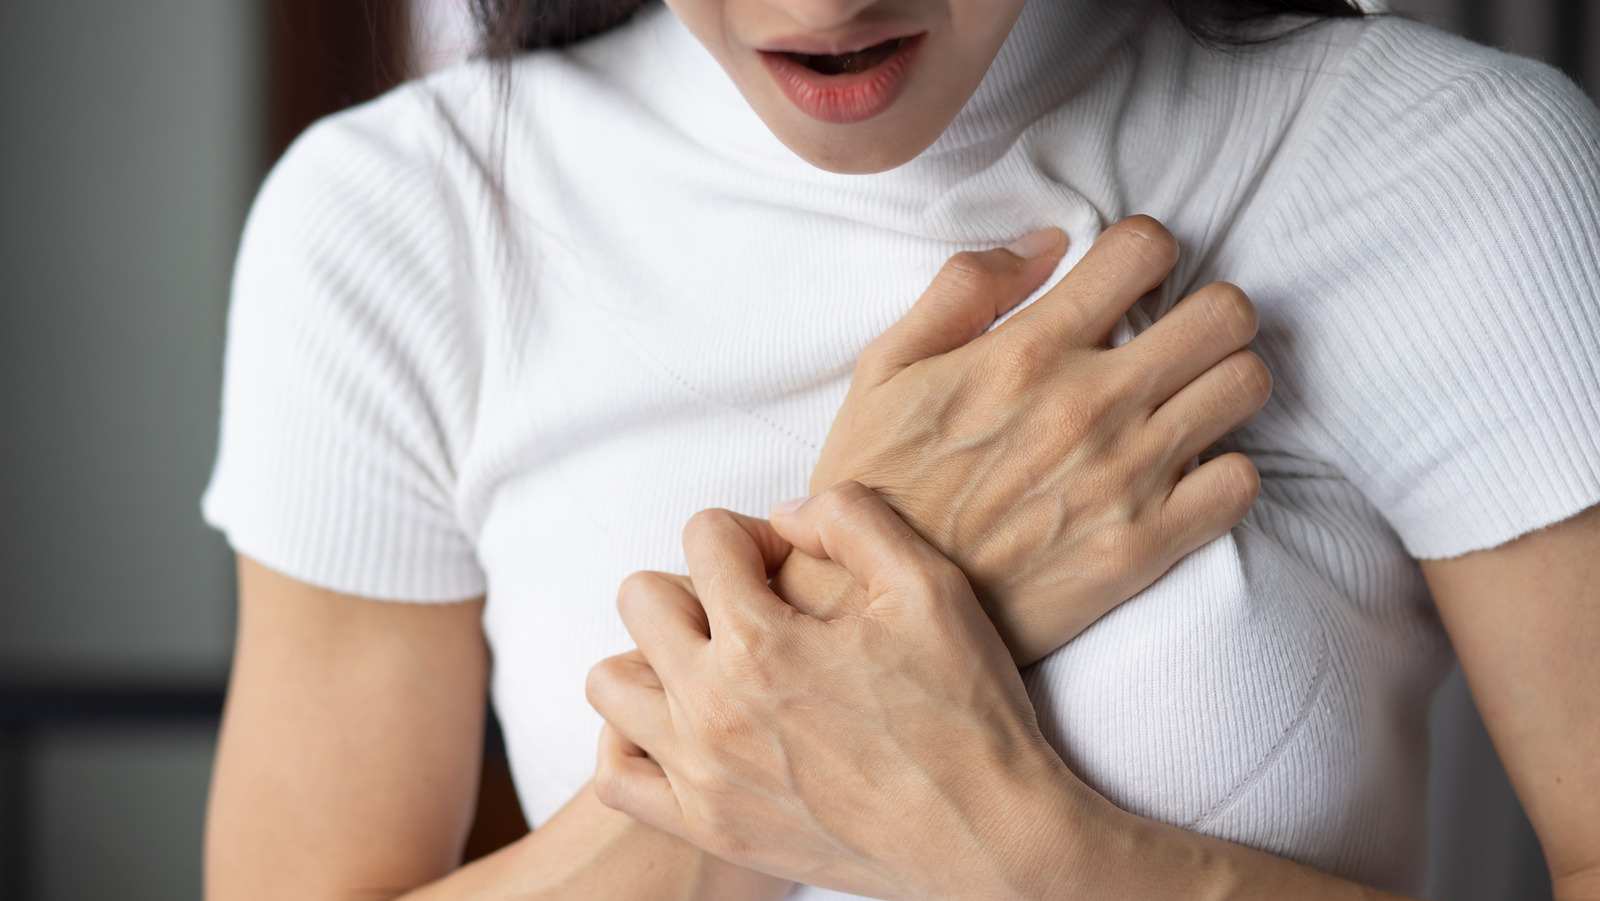 https://www.healthdigest.com/img/gallery/13-unexpected-reasons-you-have-sore-breasts/l-intro-1677076386.jpg